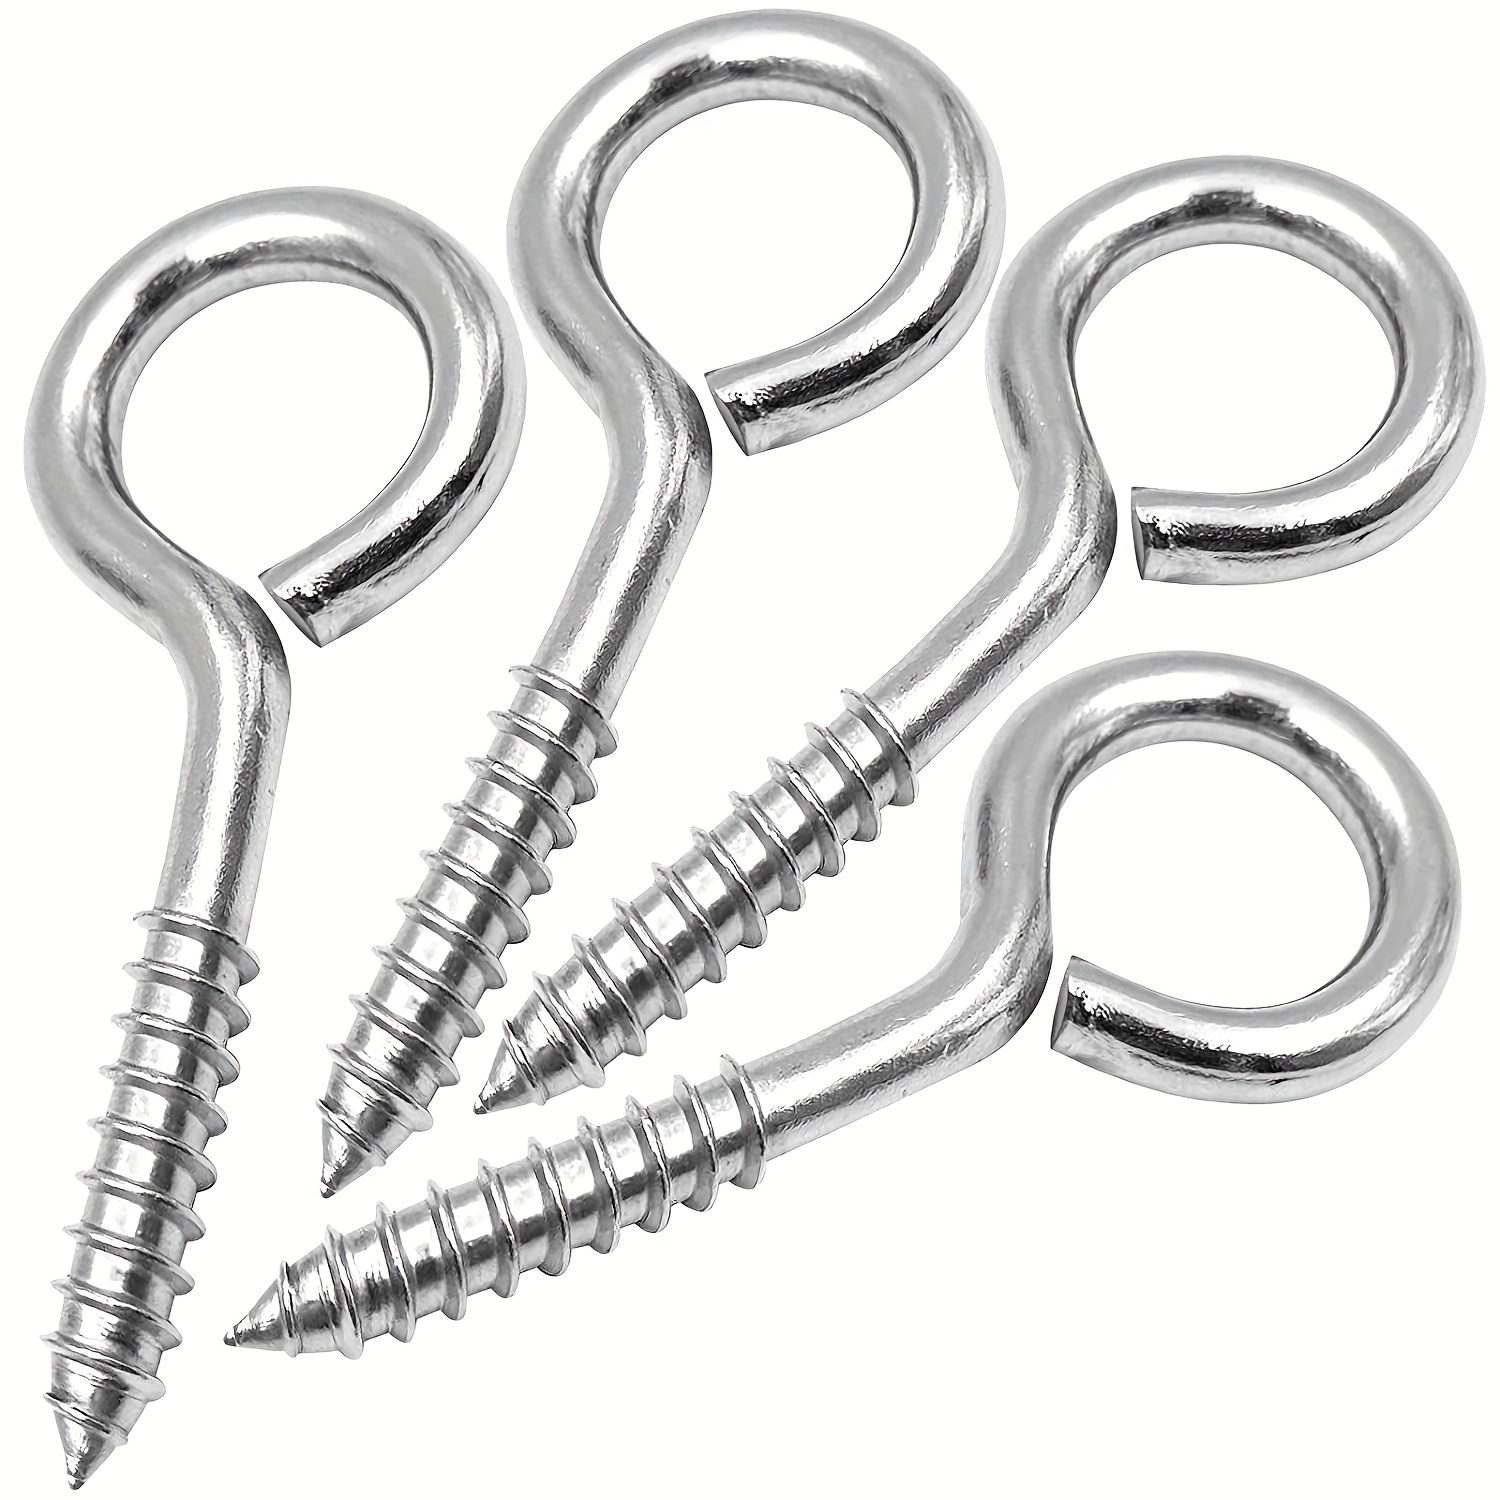 100pcs 0.67 Inches Stainless Steel Eye Screws, Heavy Duty Screw, Eye Hooks  Screw Eye Bolts Eye Hooks Screw